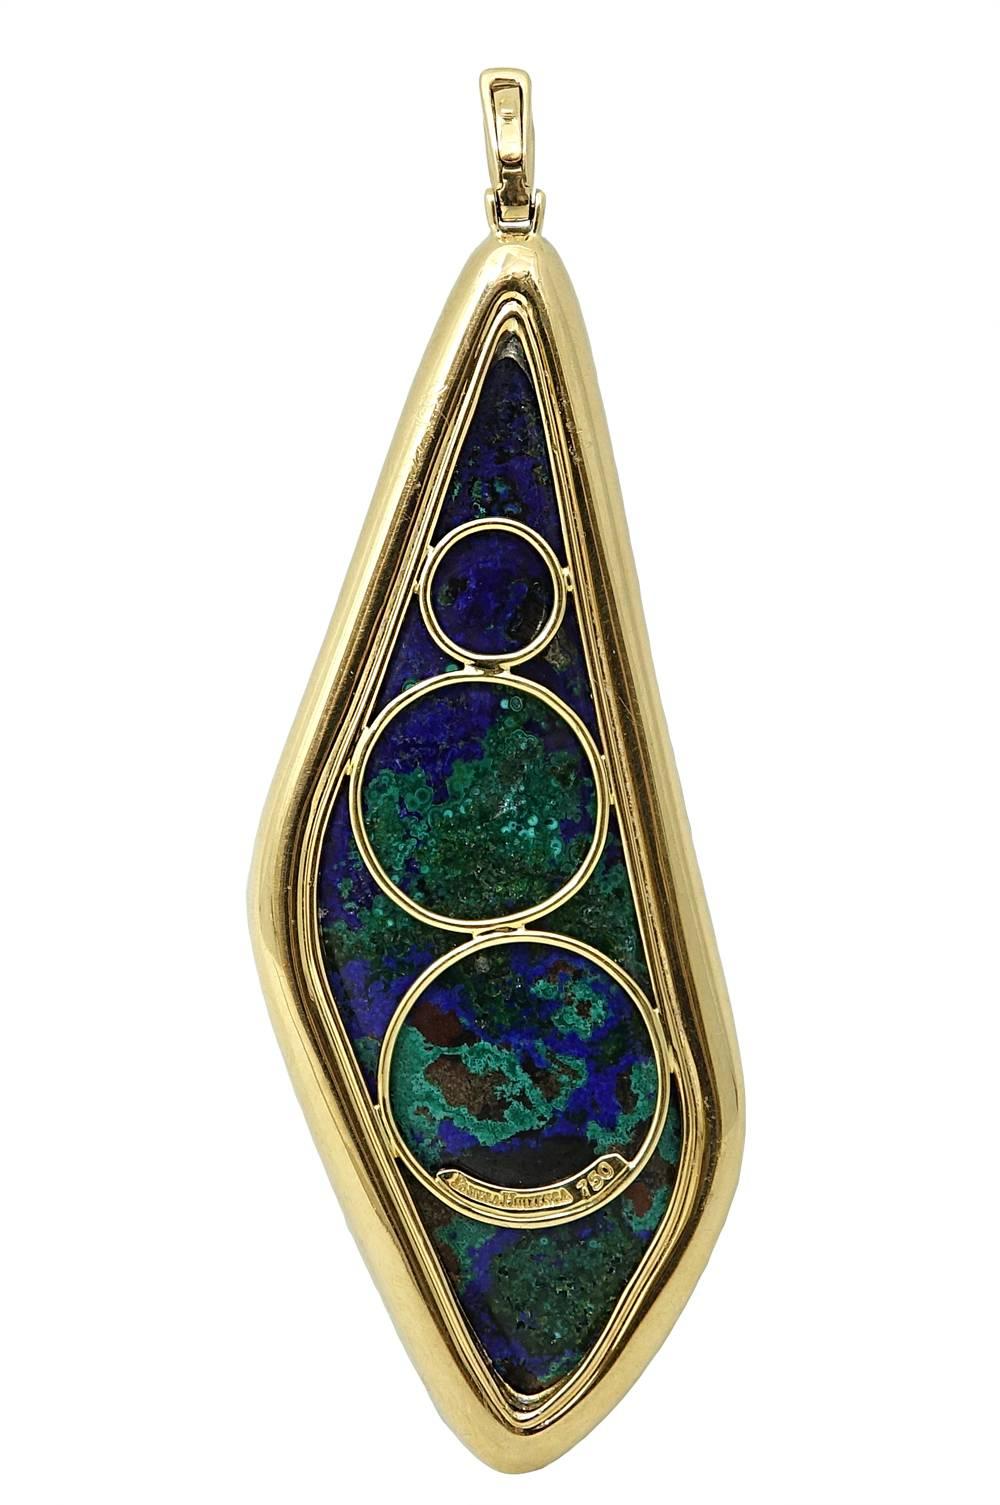 This 18K Yellow Gold Pamela Huizenga Pendant Is Absolutely Gorgeous, A Beautiful Azurite Malachite Is Set In The Center and Weighs A Total Carat Weight Of 132.63 Carats. Diamonds Surround This Stunning Stone and Weigh A Total Carat Weight Of 1.52